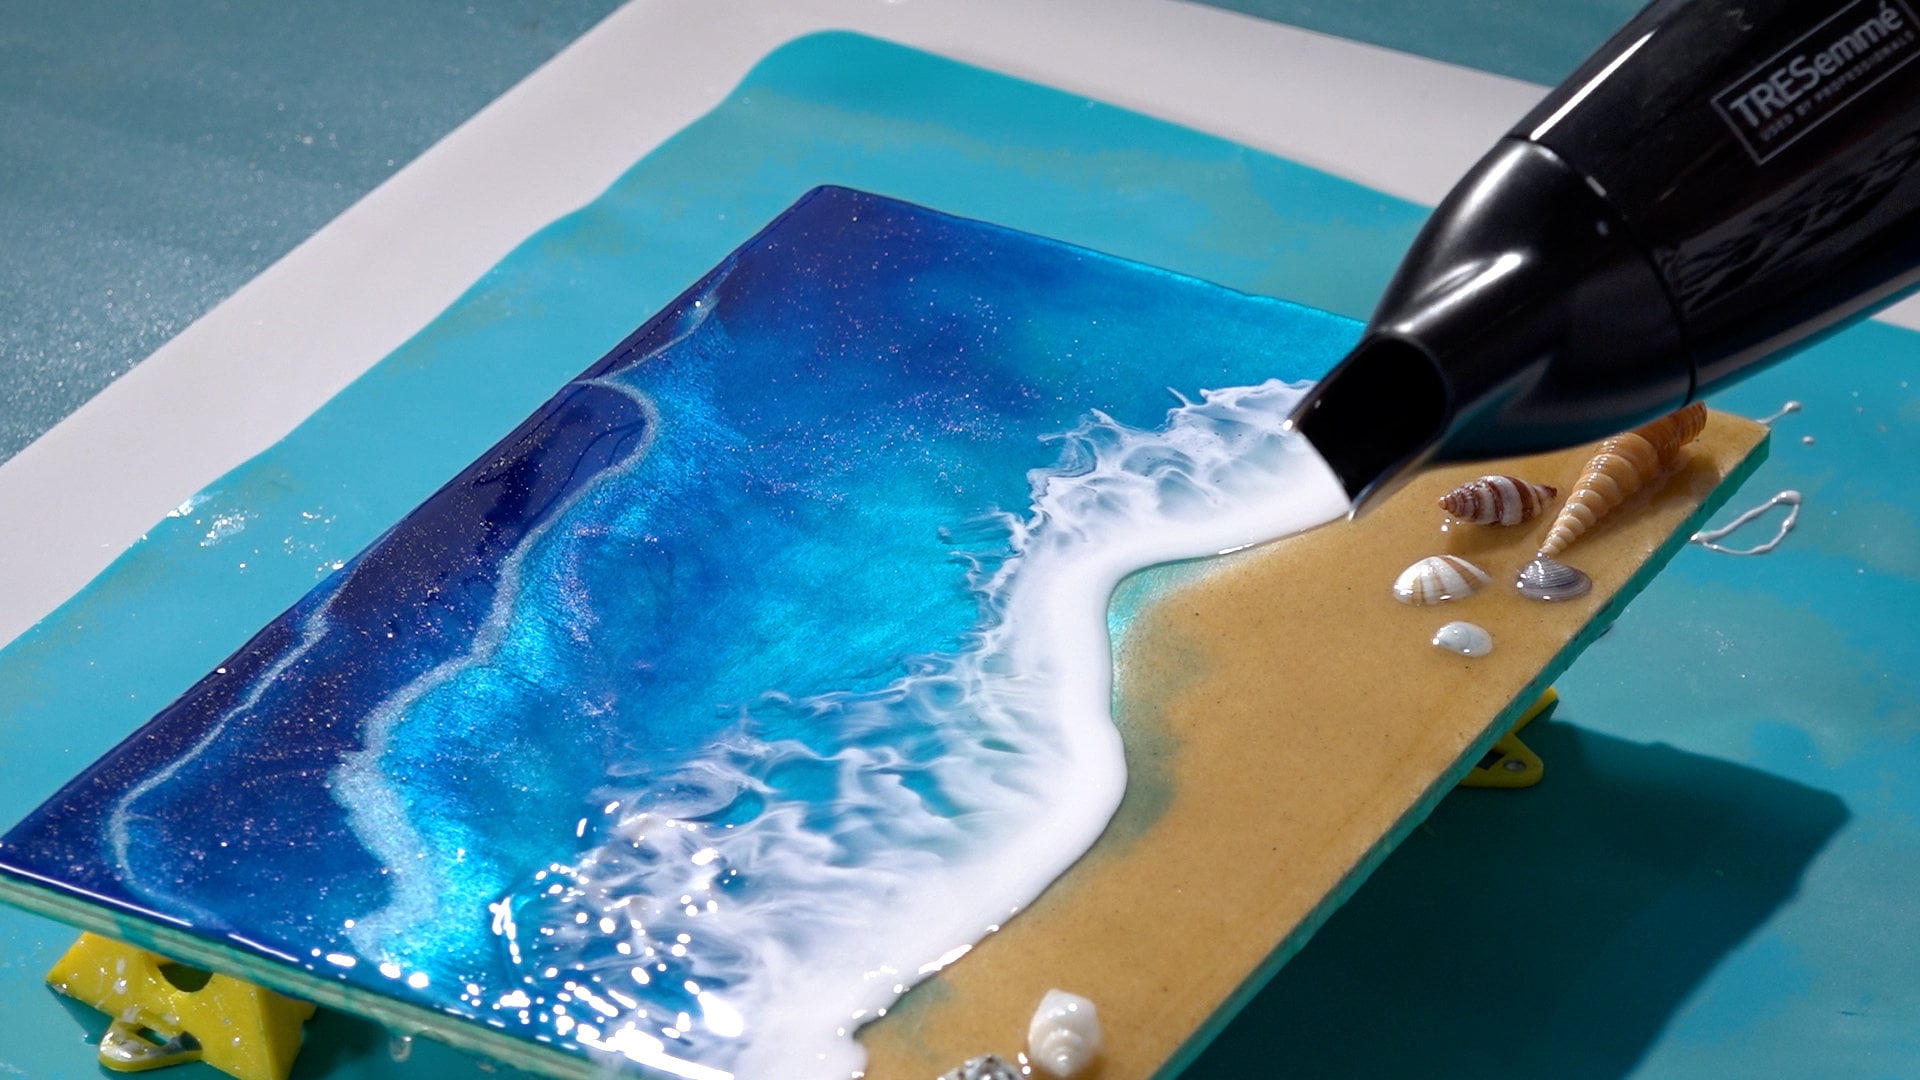 Create Ocean-inspired Resin Art With This Complete Making Waves Kit,  Including Everything to Make Two Projects Tutorial & Free Shipping 